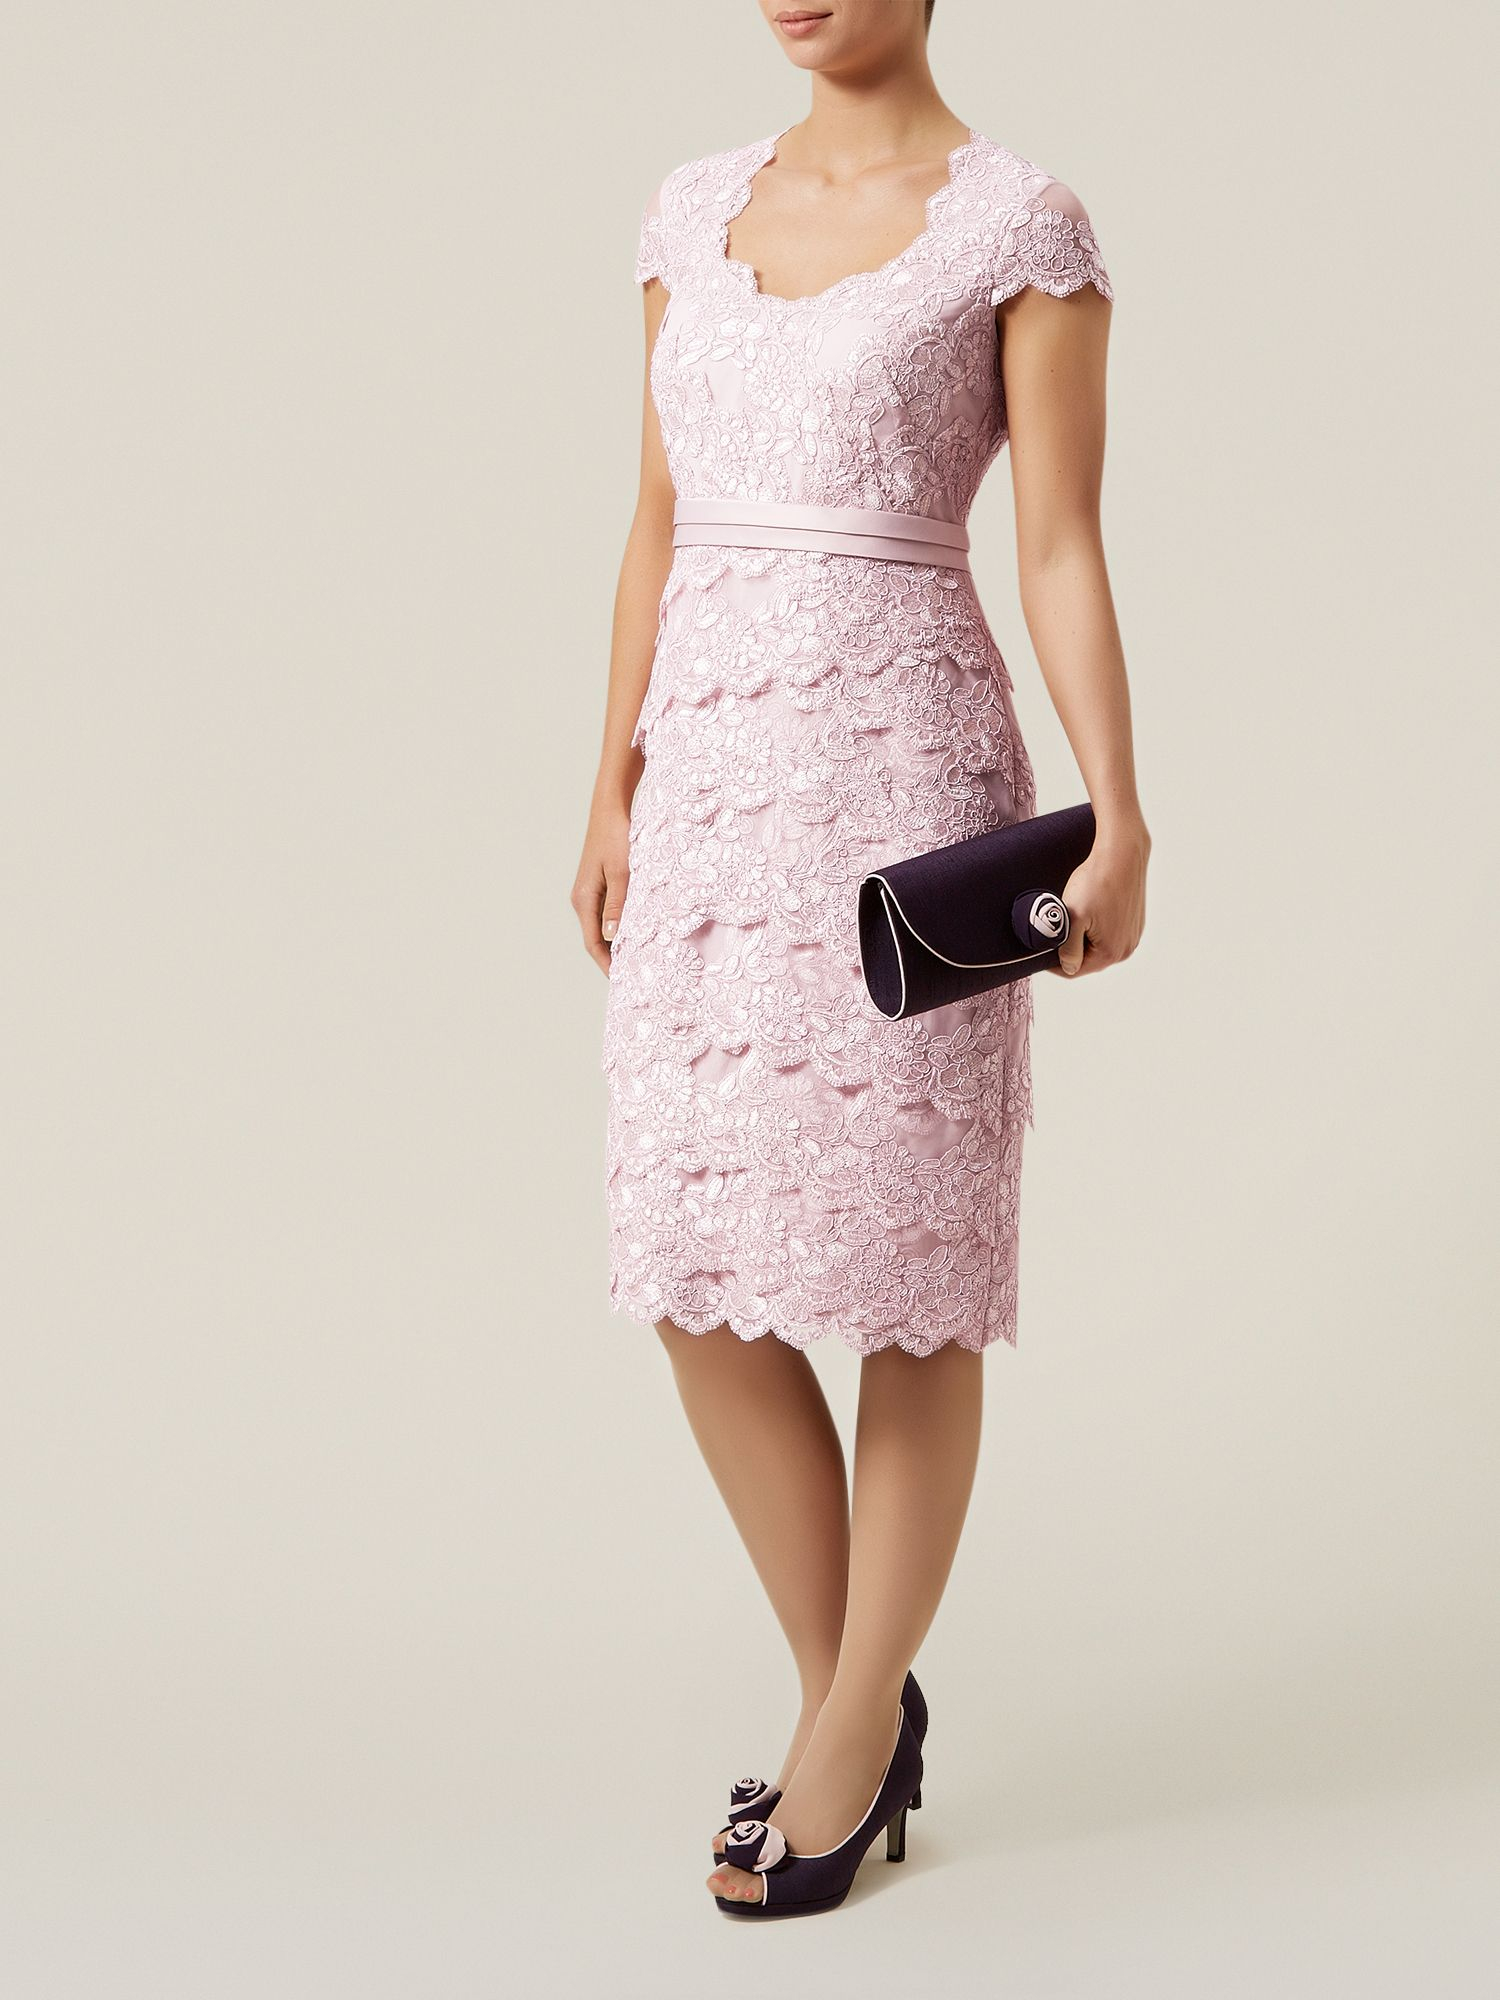 Jacques vert Lace Tiered Dress in Pink | Lyst